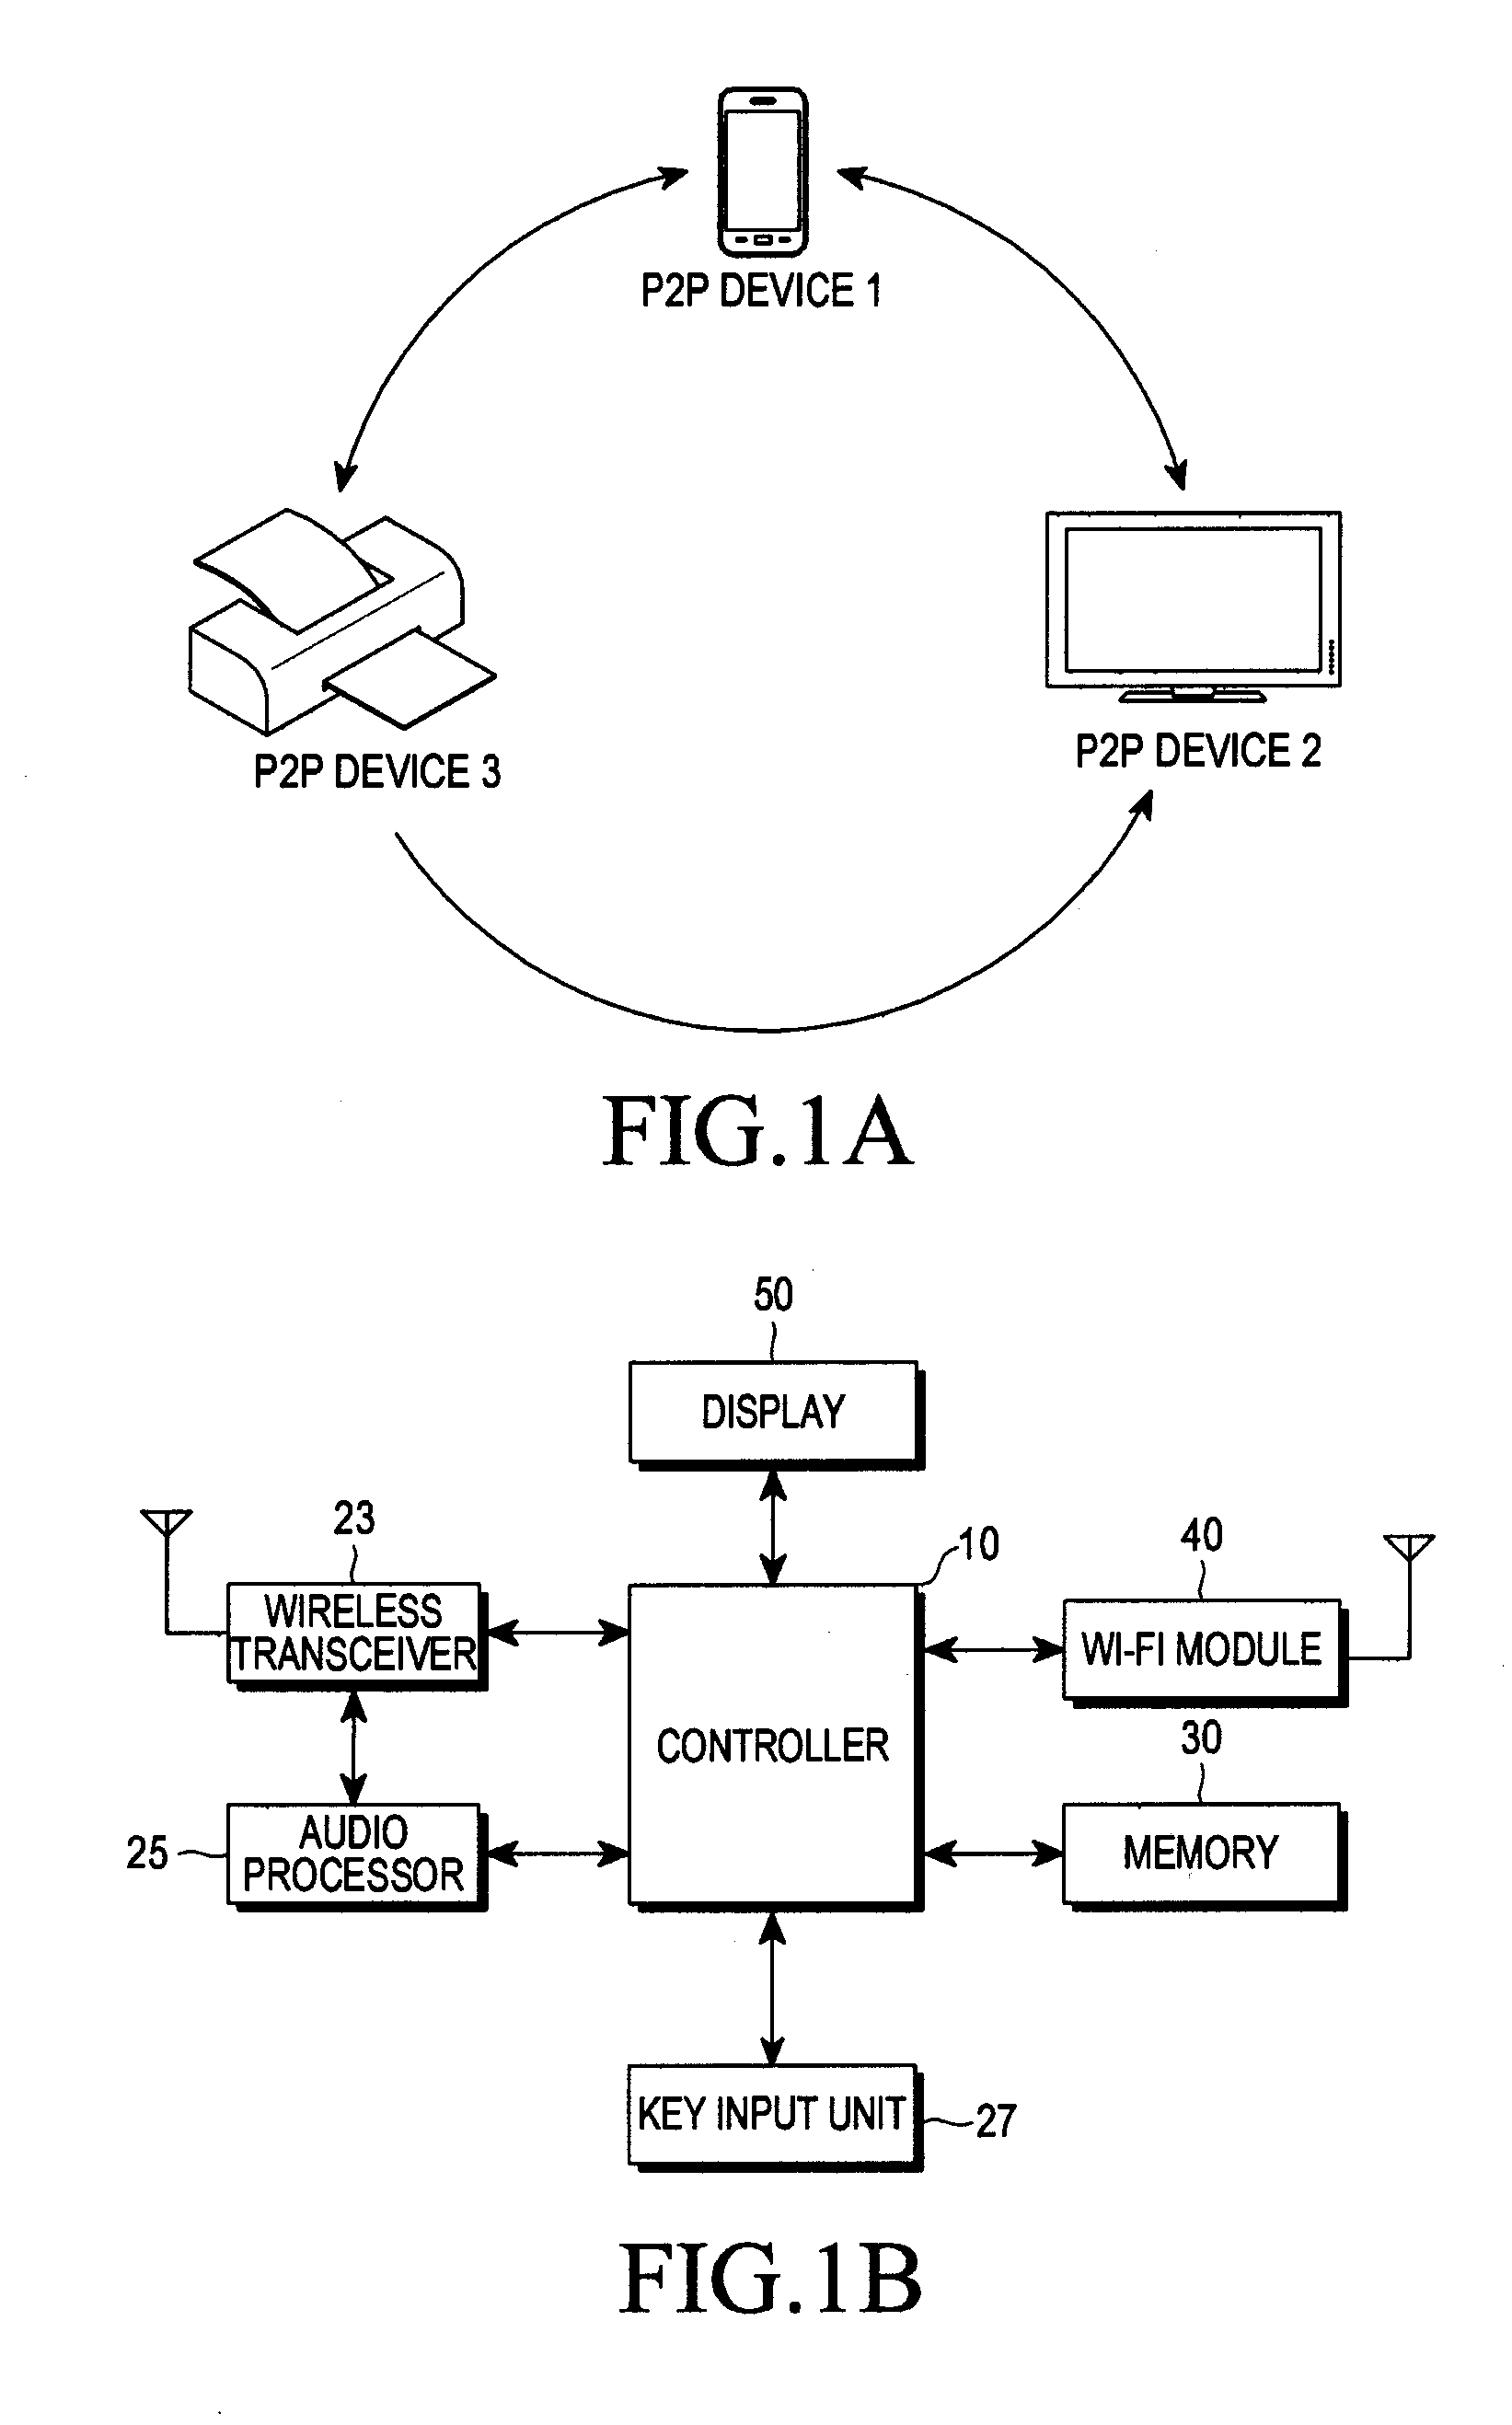 Method and apparatus for forming wi-fi p2p group using wi-fi direct